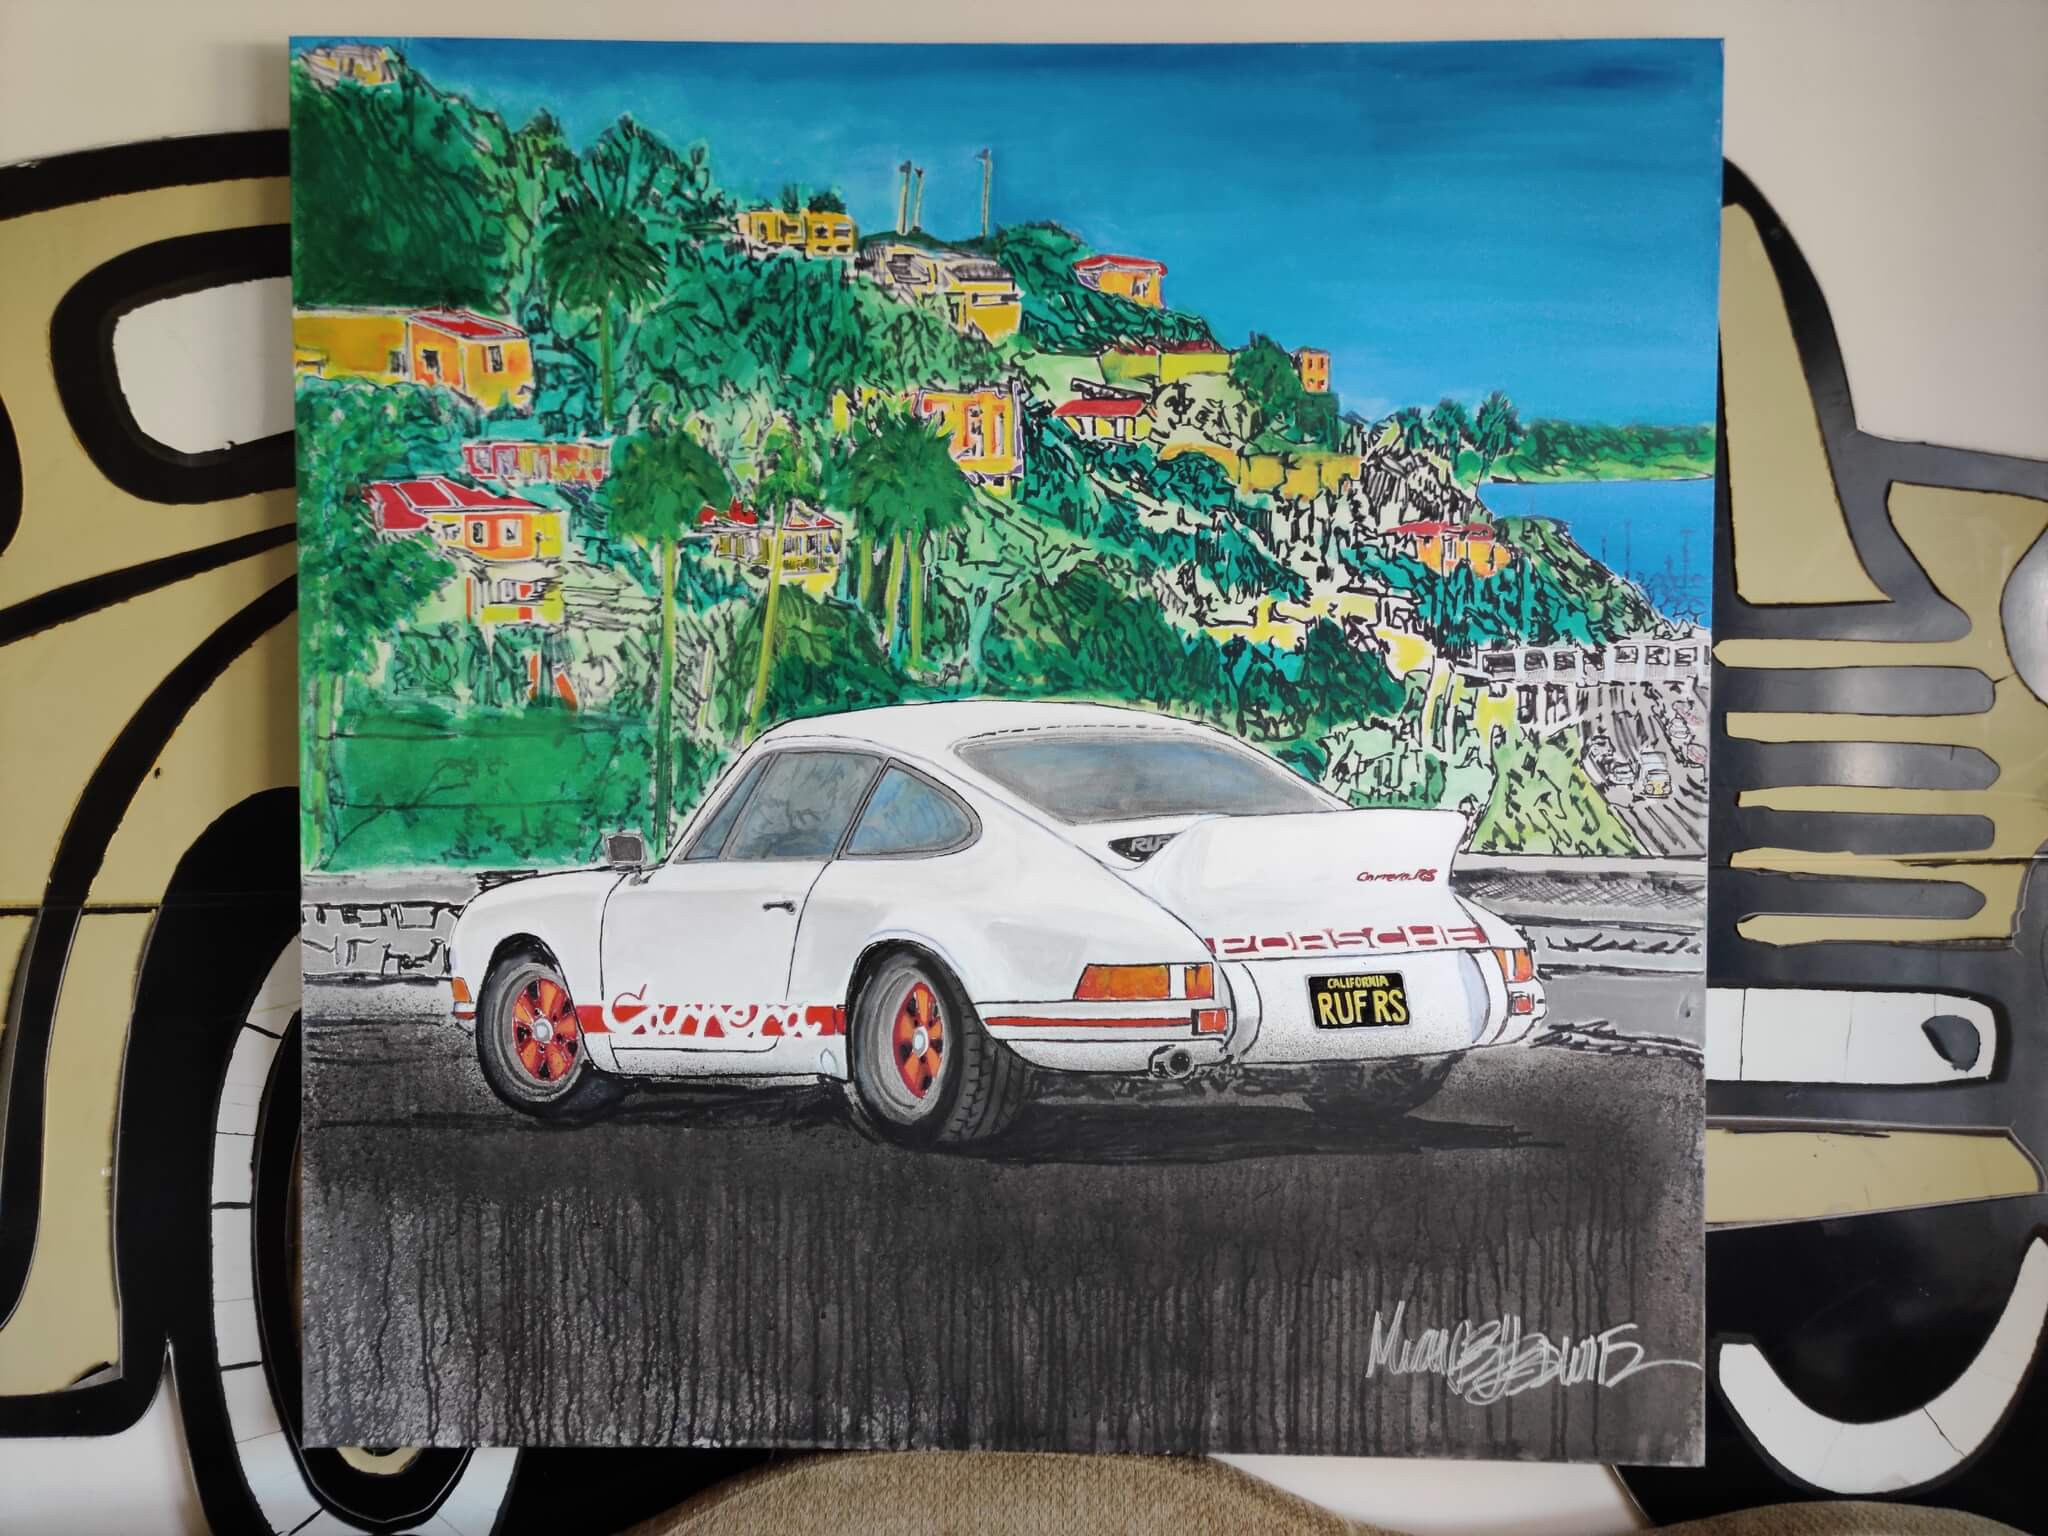 "Let's Go Home" 911 Carrera RS Painting by Michael Ledwitz